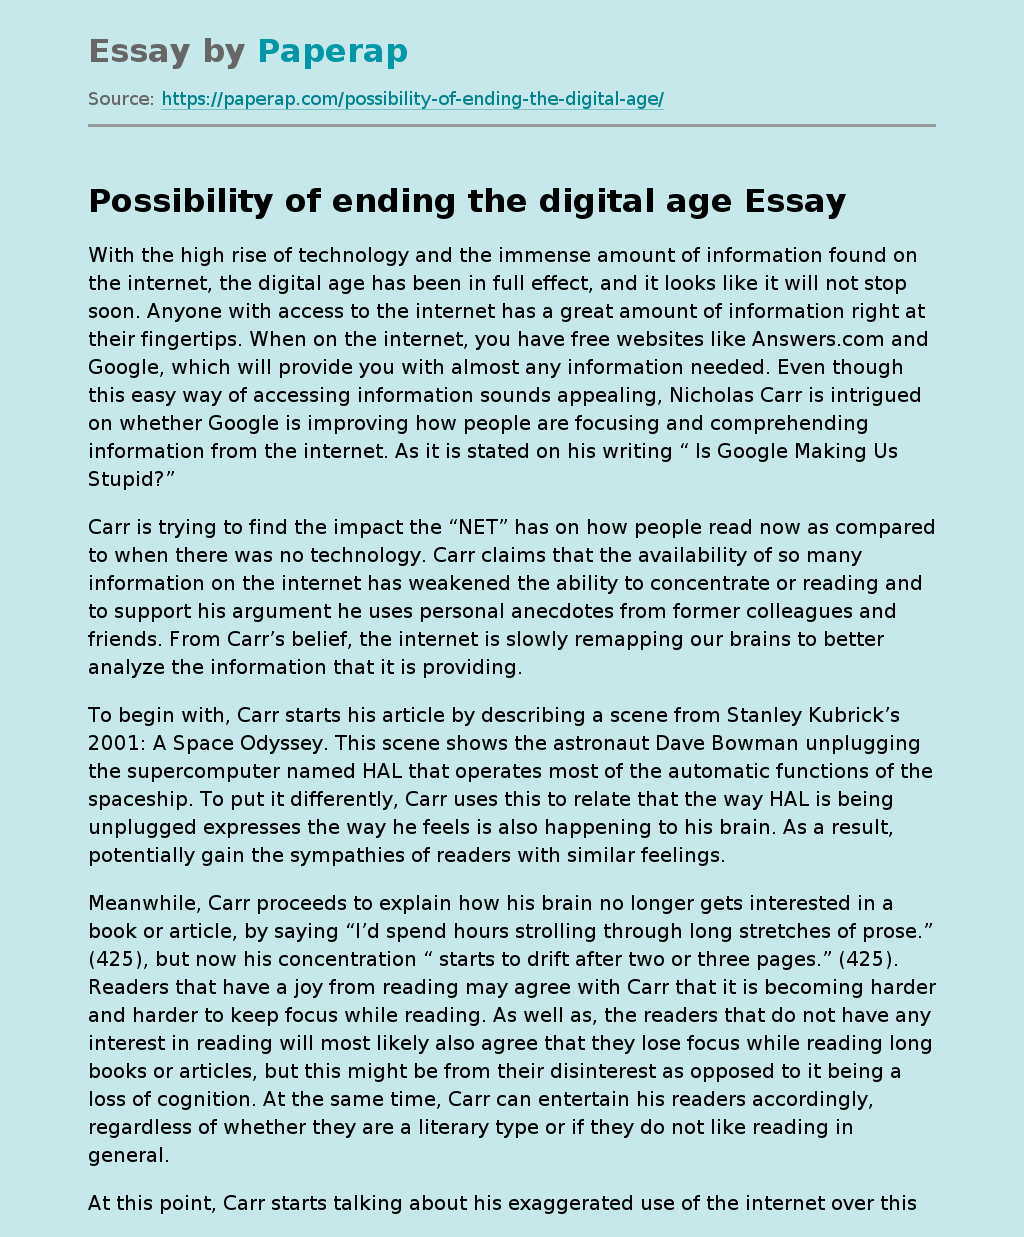 Possibility of ending the digital age